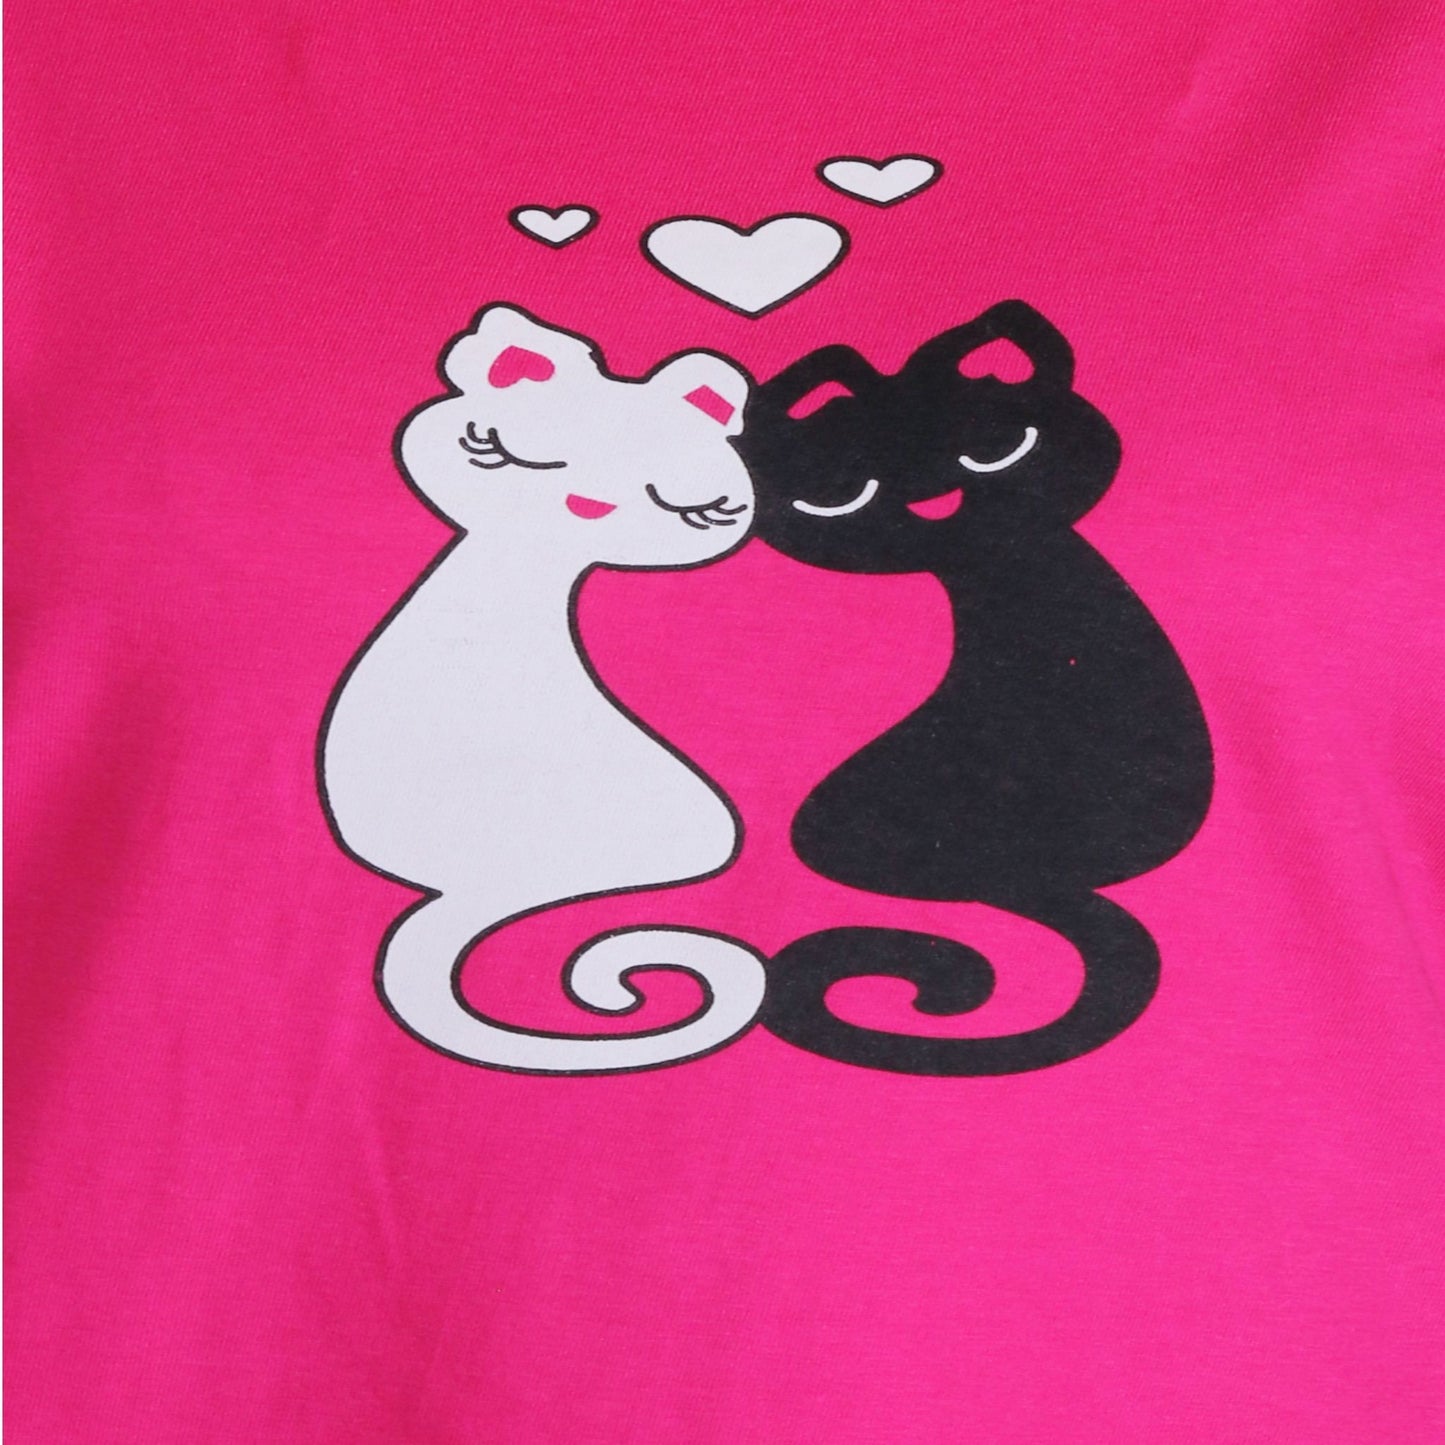 close-up view of pink color t shirt with white and black color cat image printed